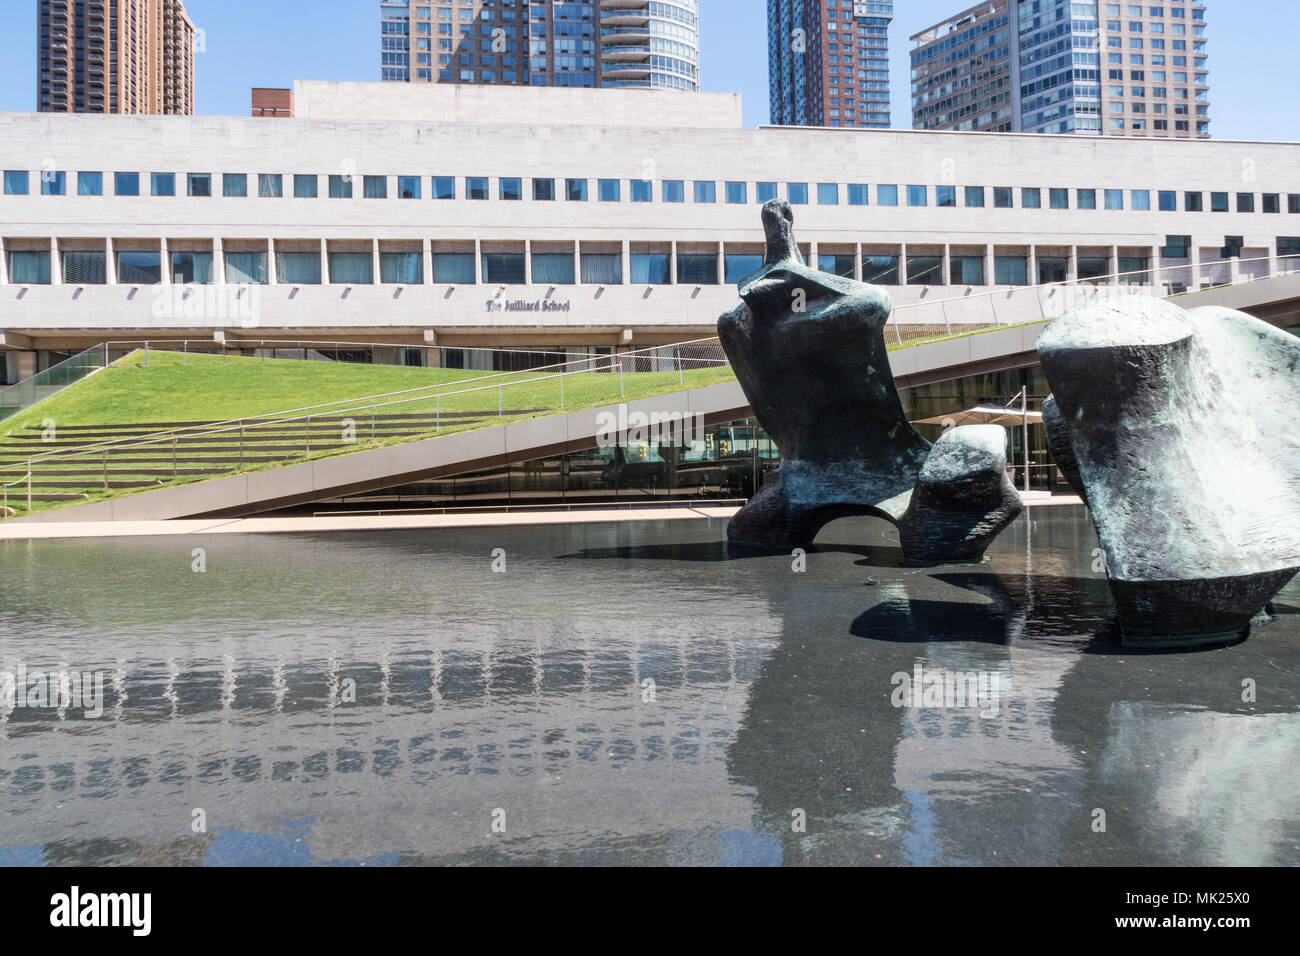 The Juilliard School is just north of the Lincoln Center Paul Milstein Pool and Terrace, NYC Stock Photo